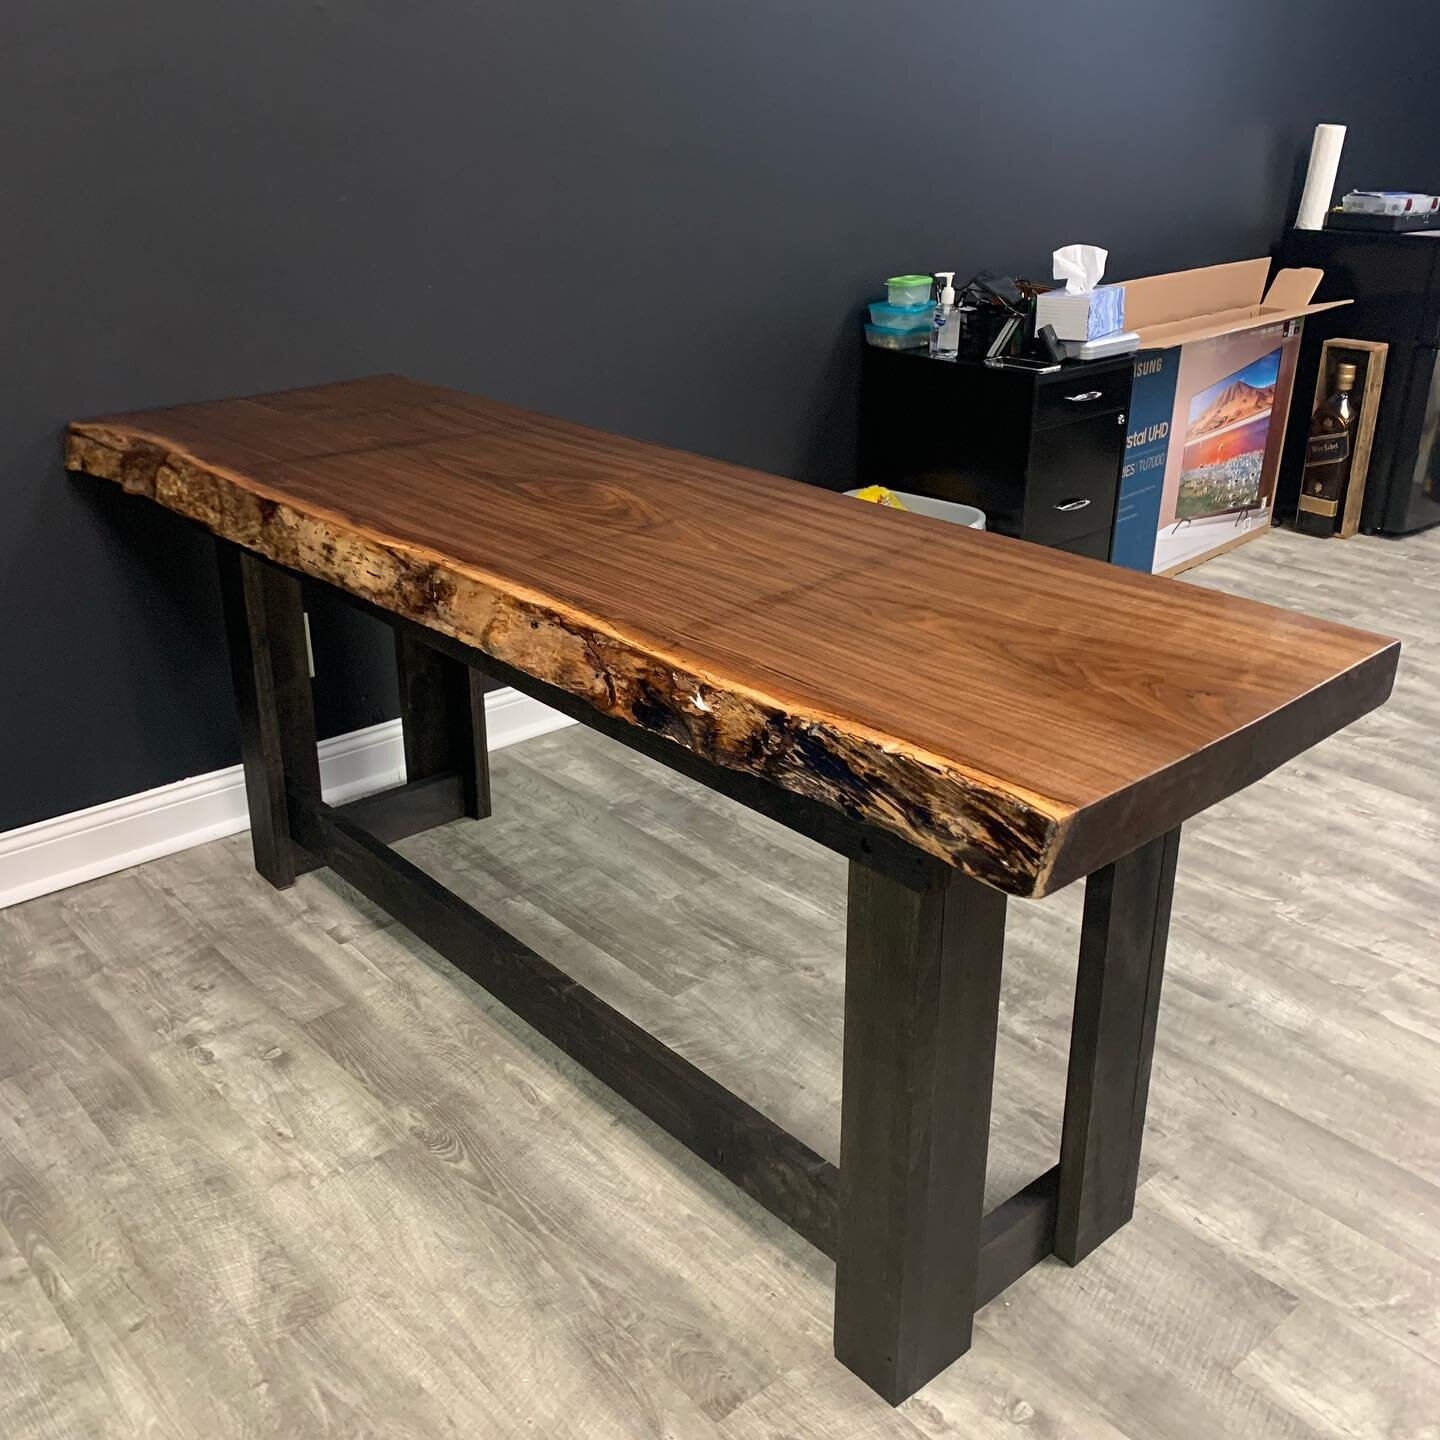 Custom walnut table for my very good friend @coniahtimm. Congrats on your own studio! If your looking for some fresh ink contact @axialstudio_ct  #cloutierconstructionanddesign #custom #walnut #liveedge #table #tattoostudio #therapysessions #ink #liv